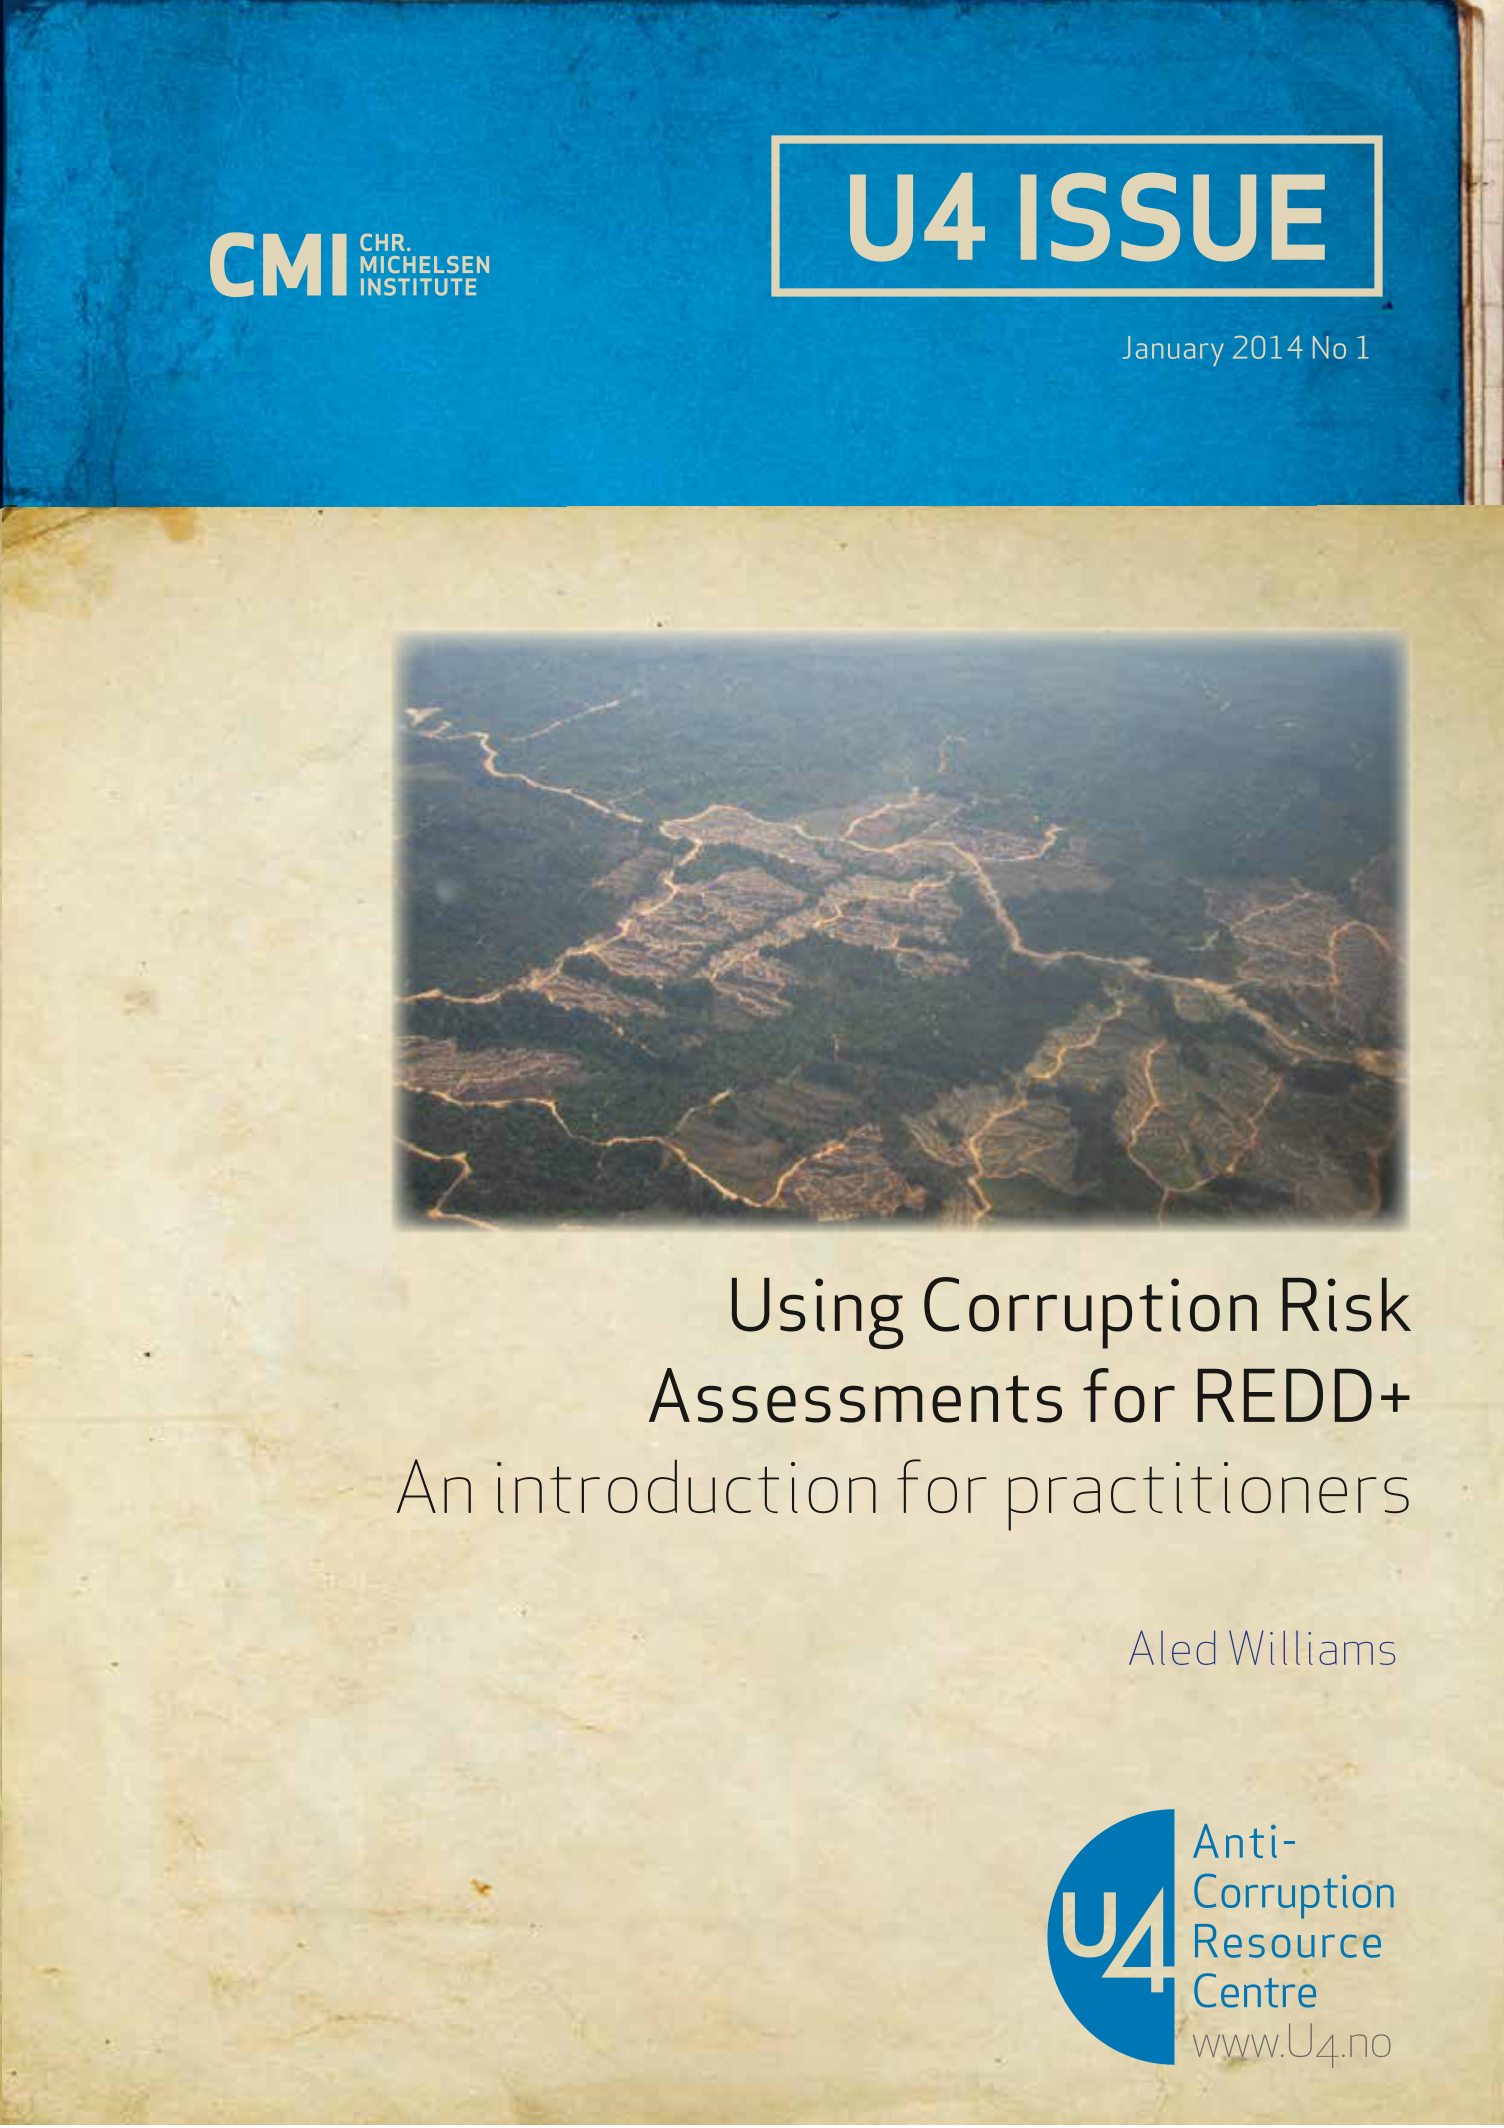 Using corruption risk assessments for REDD+: An introduction for practitioners